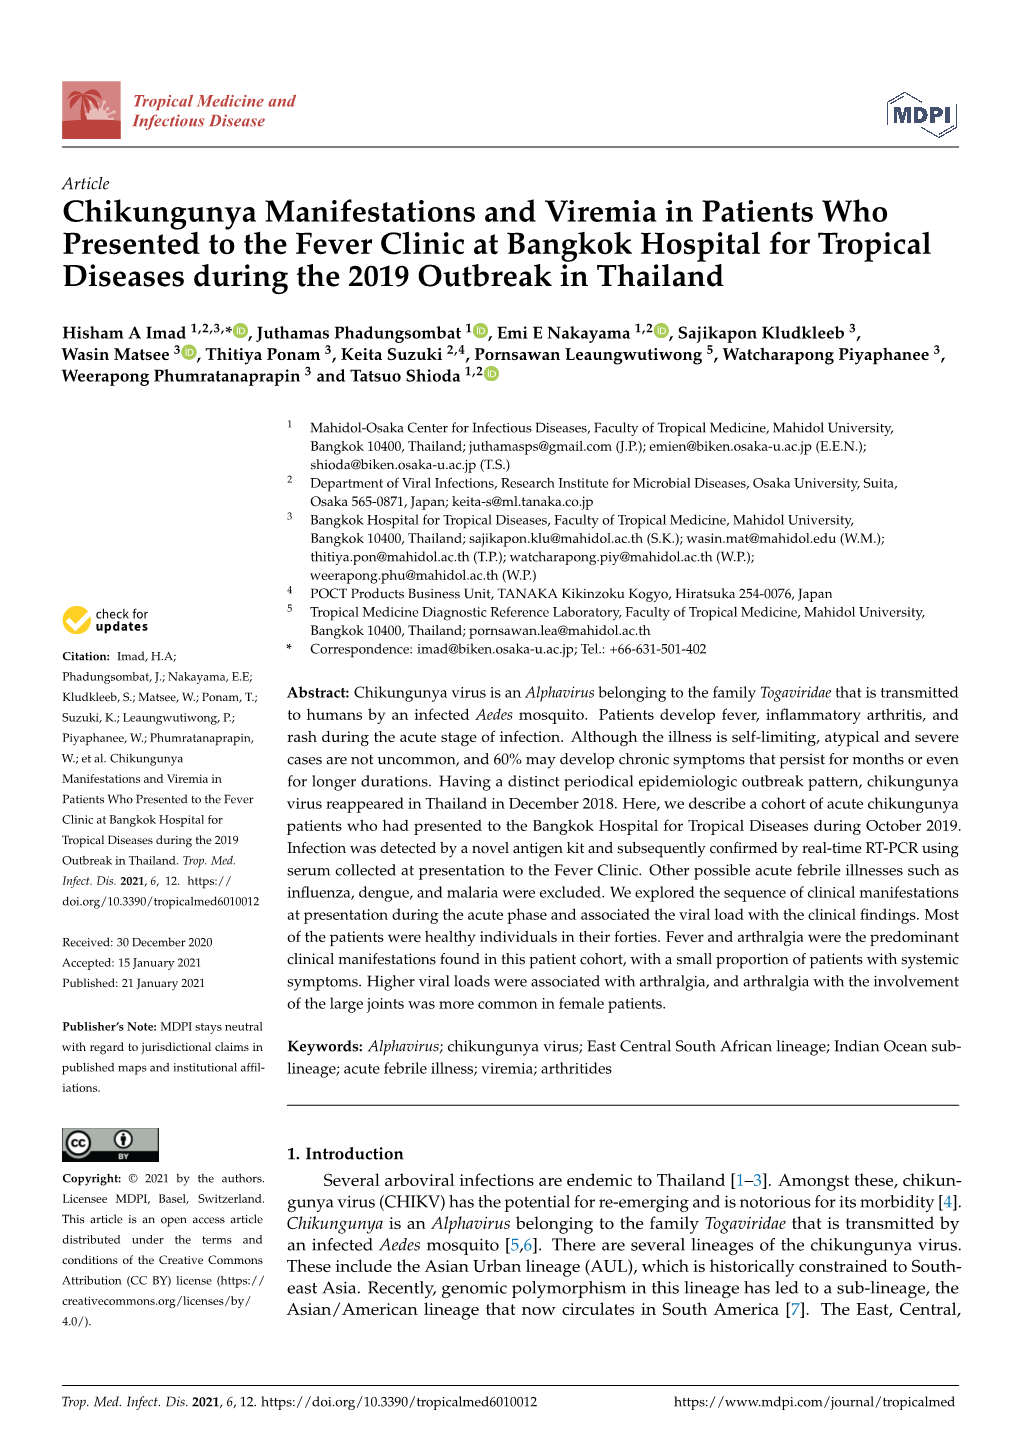 Chikungunya Manifestations and Viremia in Patients Who Presented to the Fever Clinic at Bangkok Hospital for Tropical Diseases During the 2019 Outbreak in Thailand